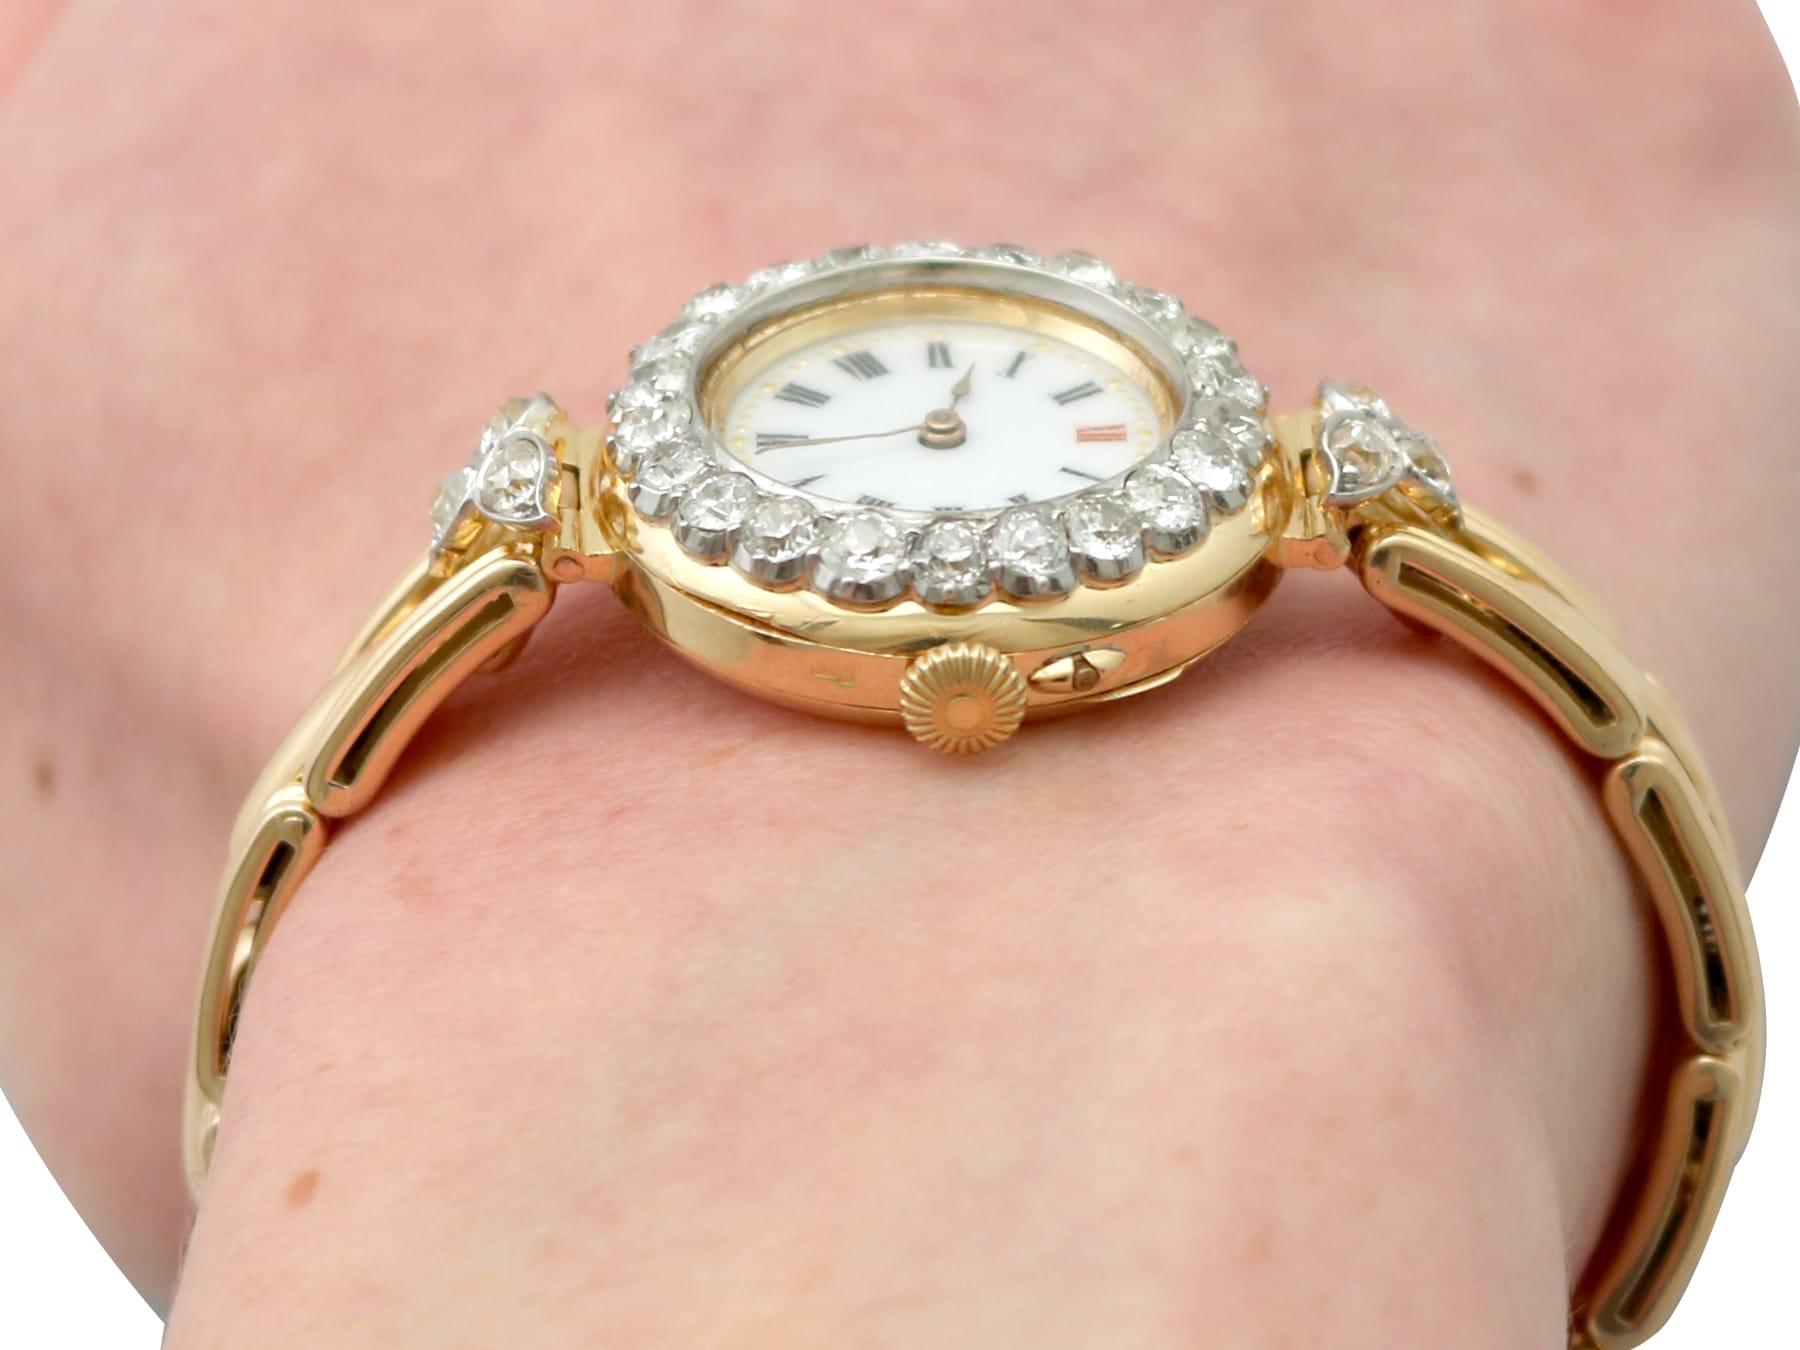 Antique Edwardian 2.75Ct Diamond and 18k Yellow Gold Cocktail Watch 1909 For Sale 14